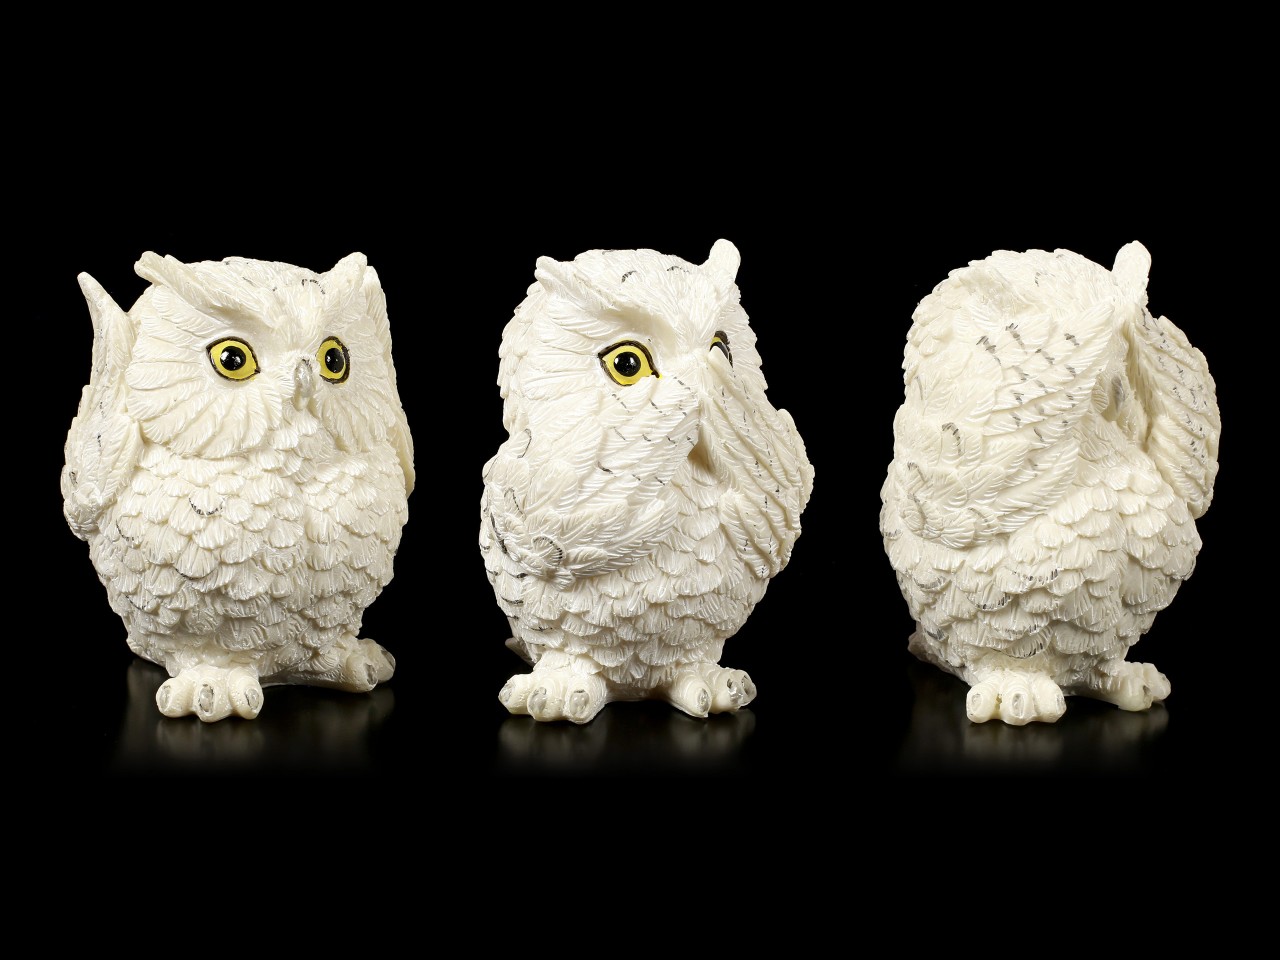 Snow Owl Figurines - The Three Wise - large